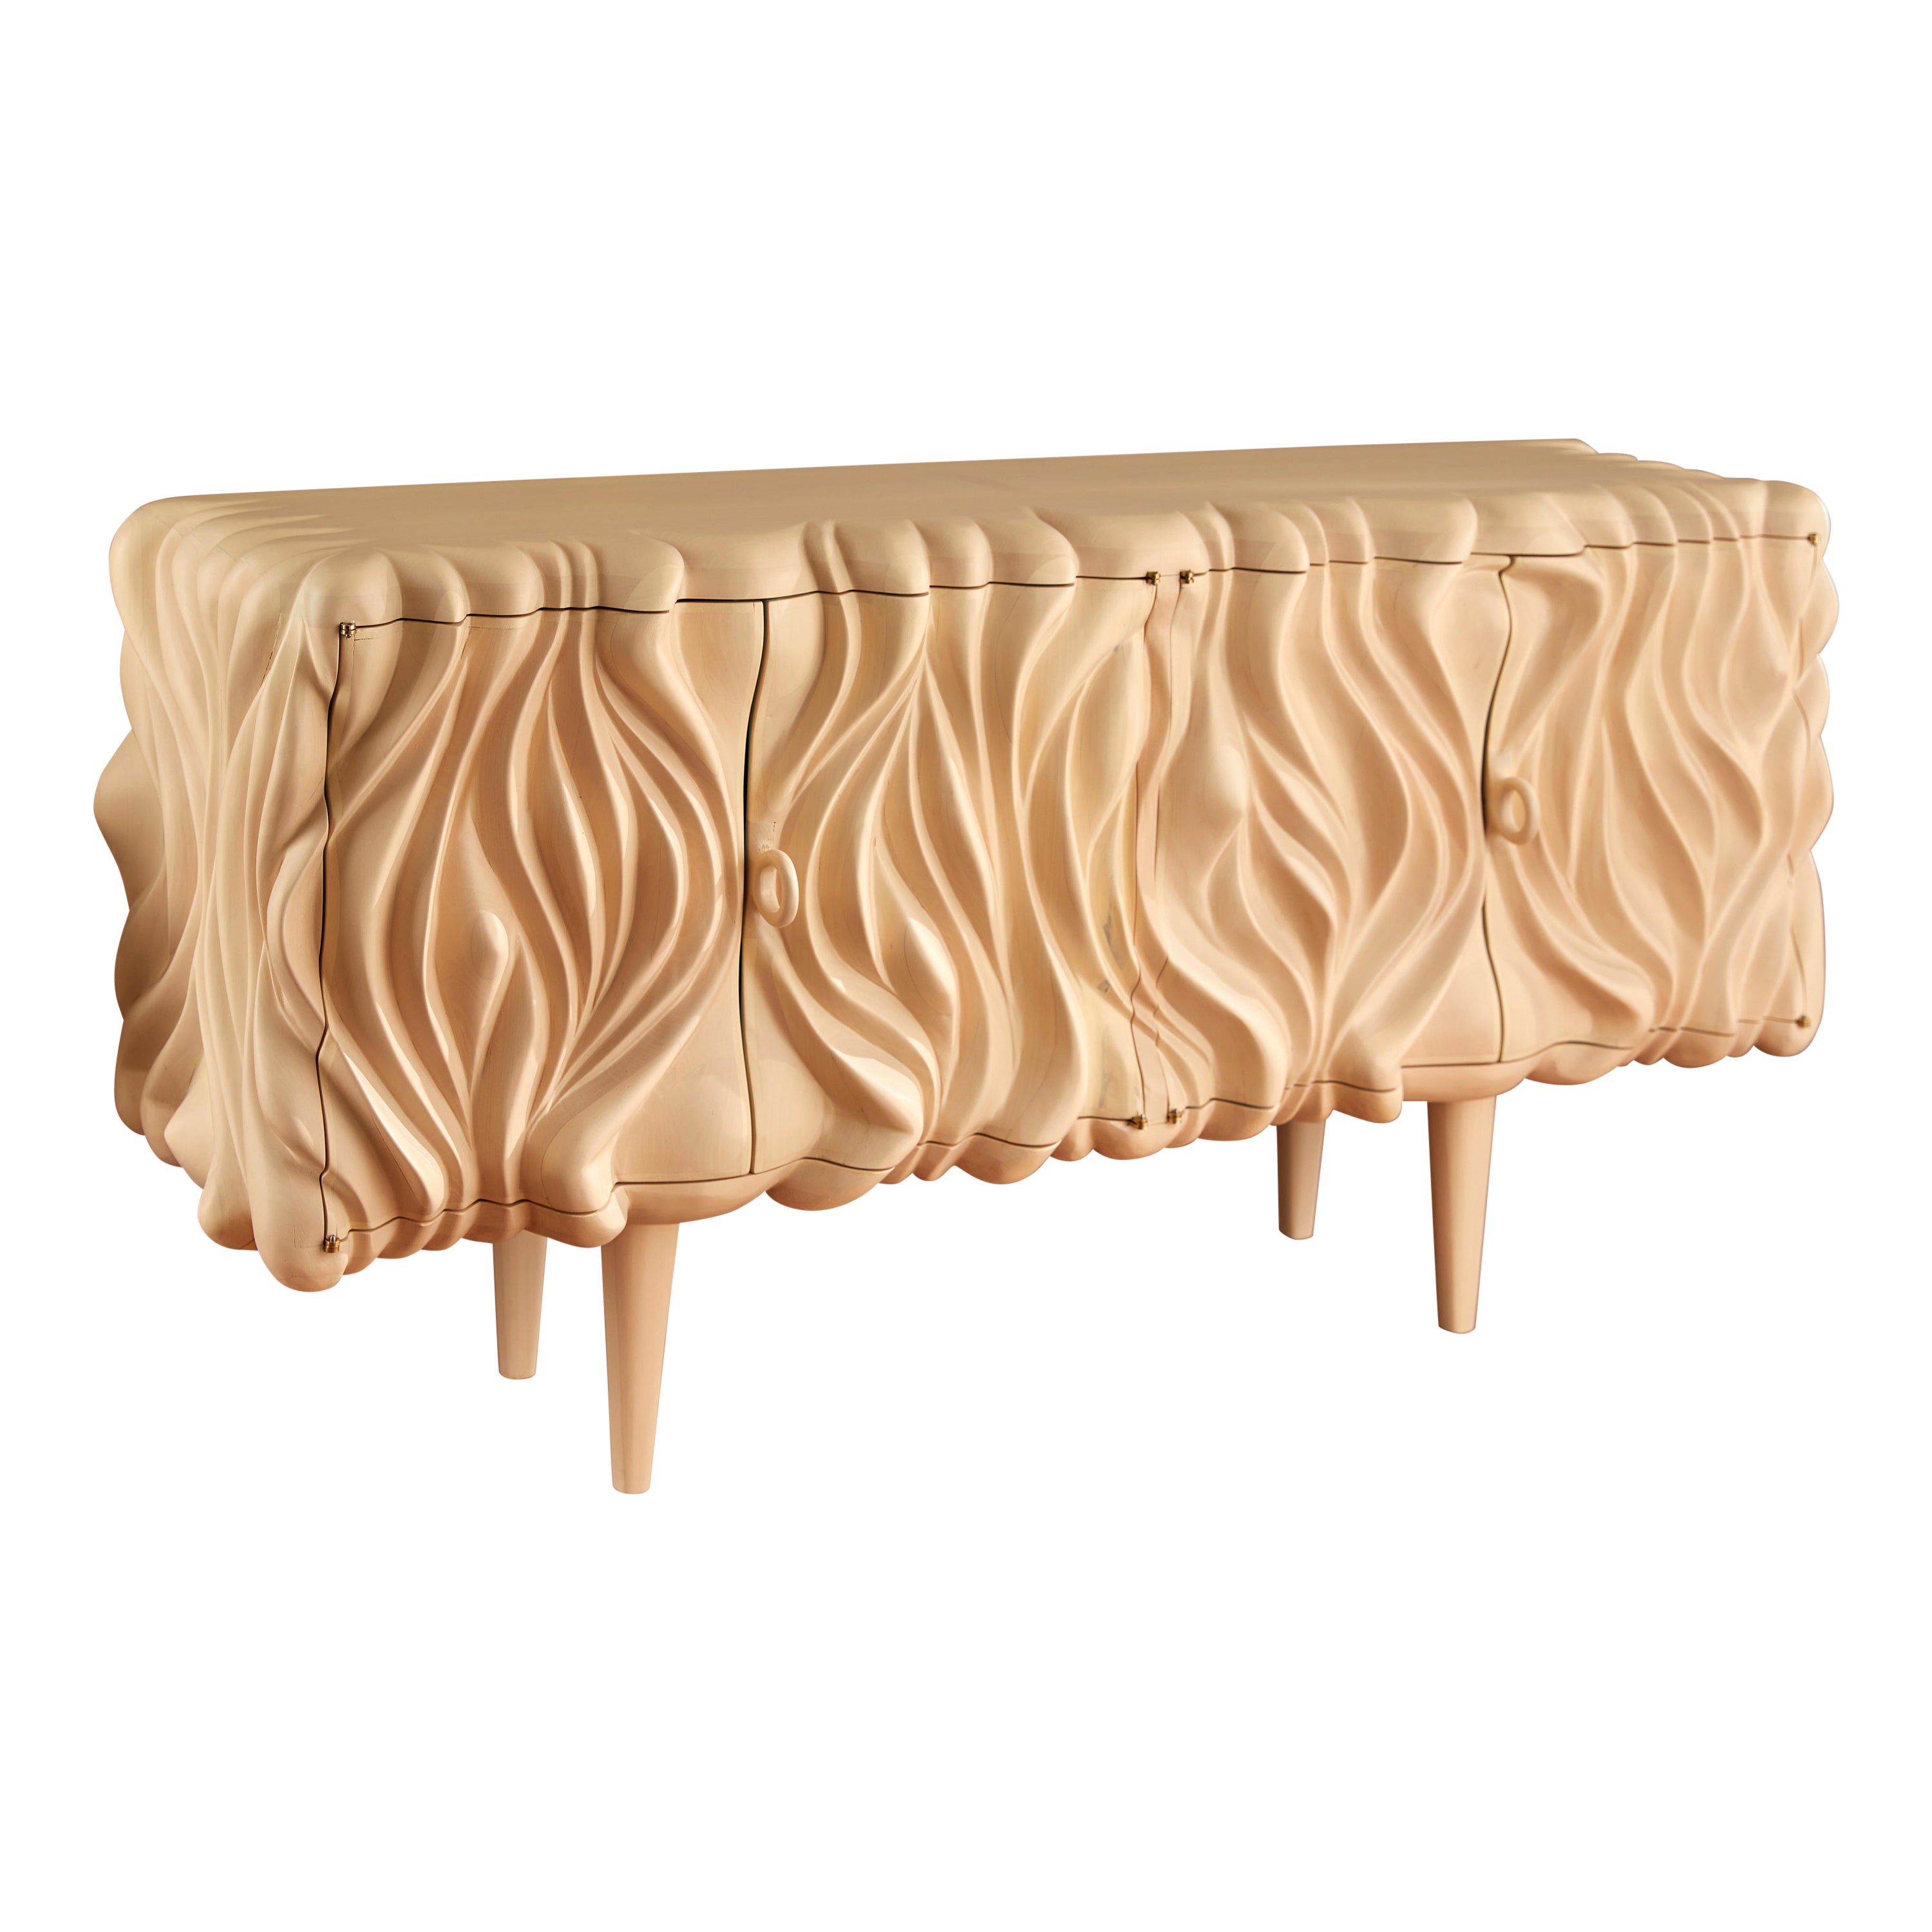 "Monceau" sideboard by G. Nicolet For Sale